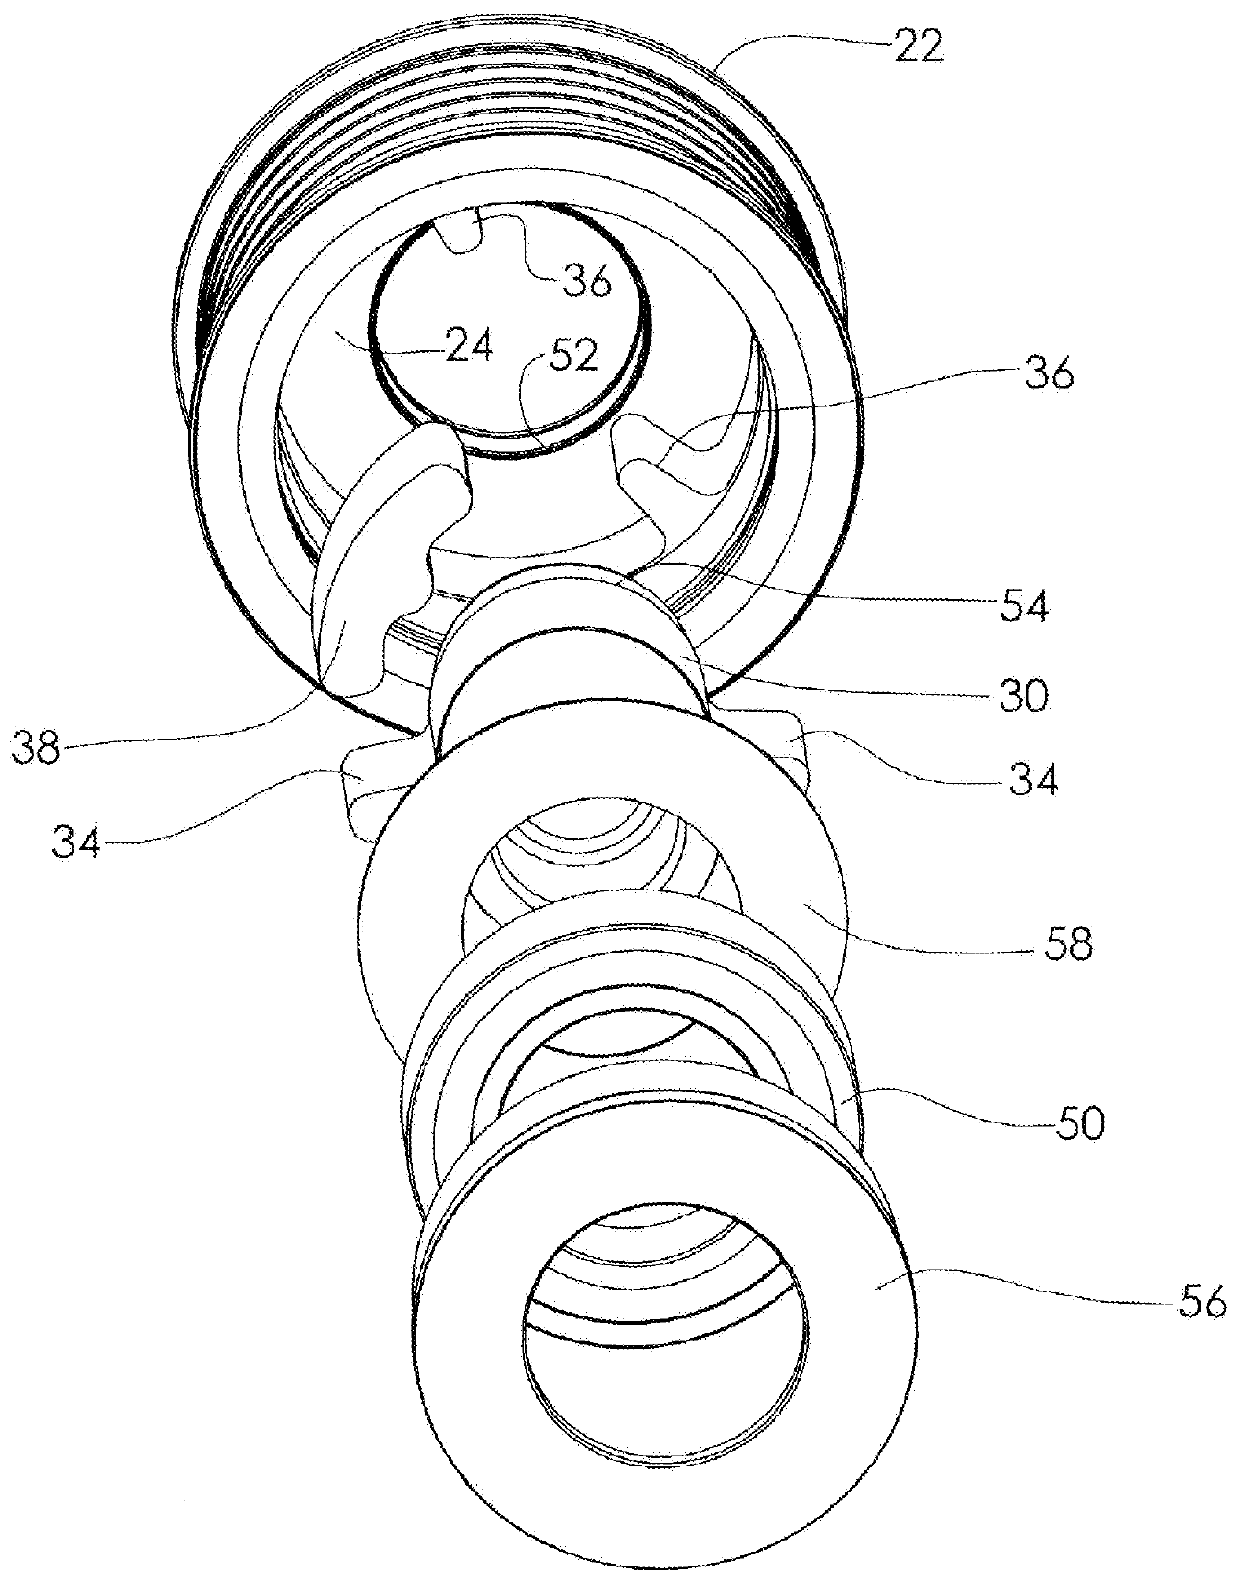 Elastomeric spring pulley assembly for rotary devices